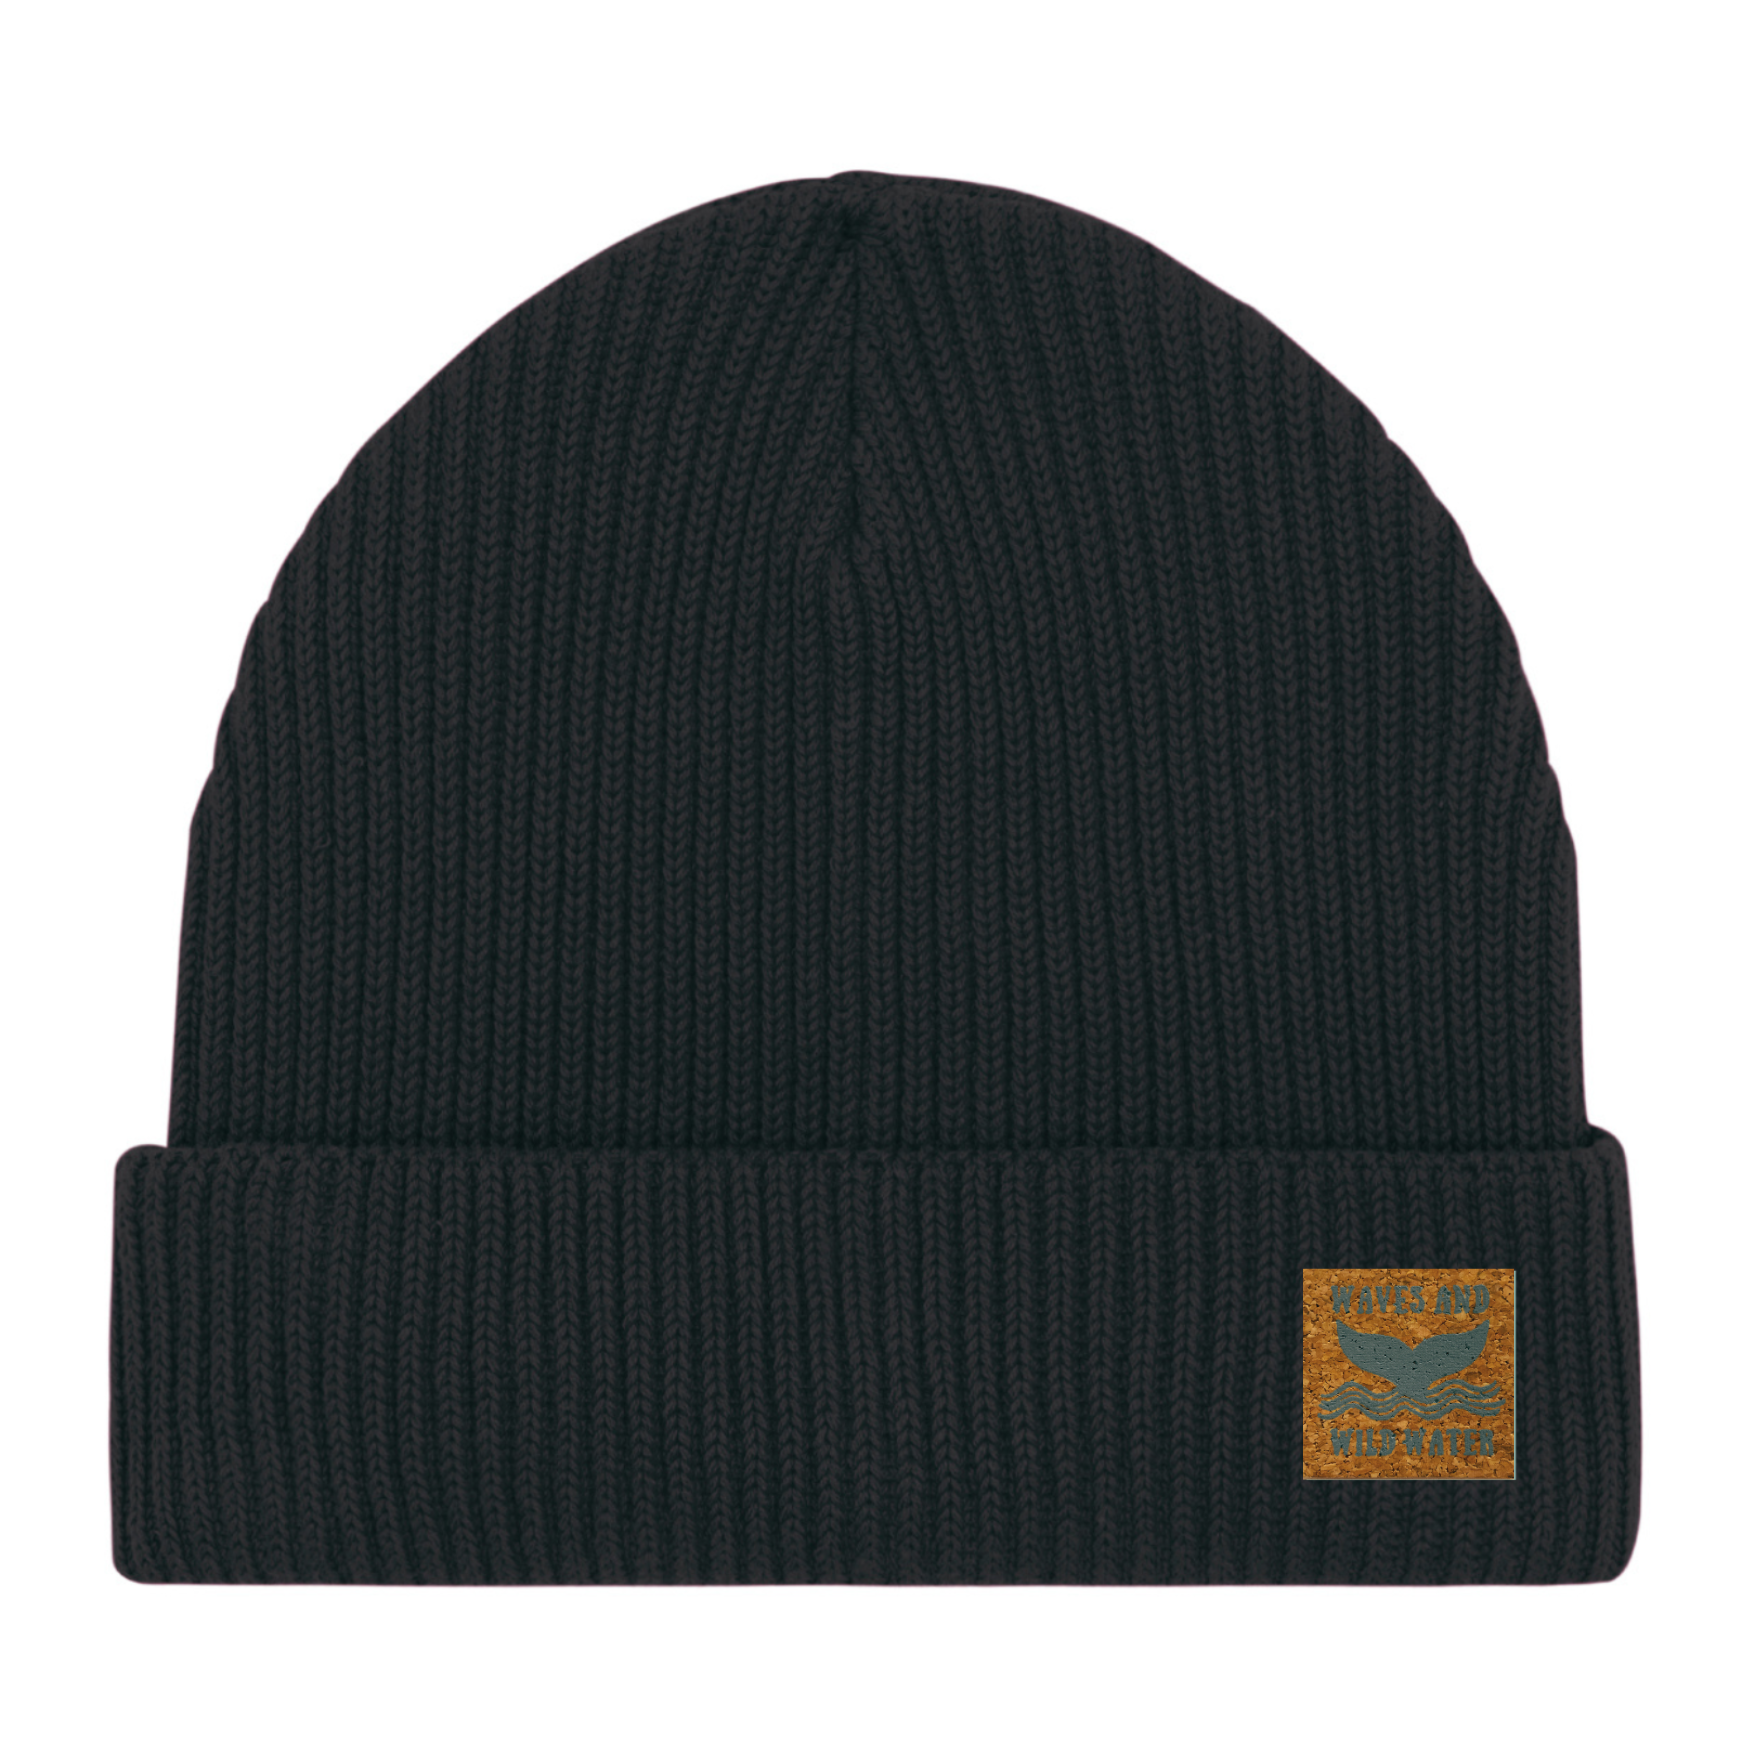 A black fisherman beanie hat with a Waves & Wild Water label. 